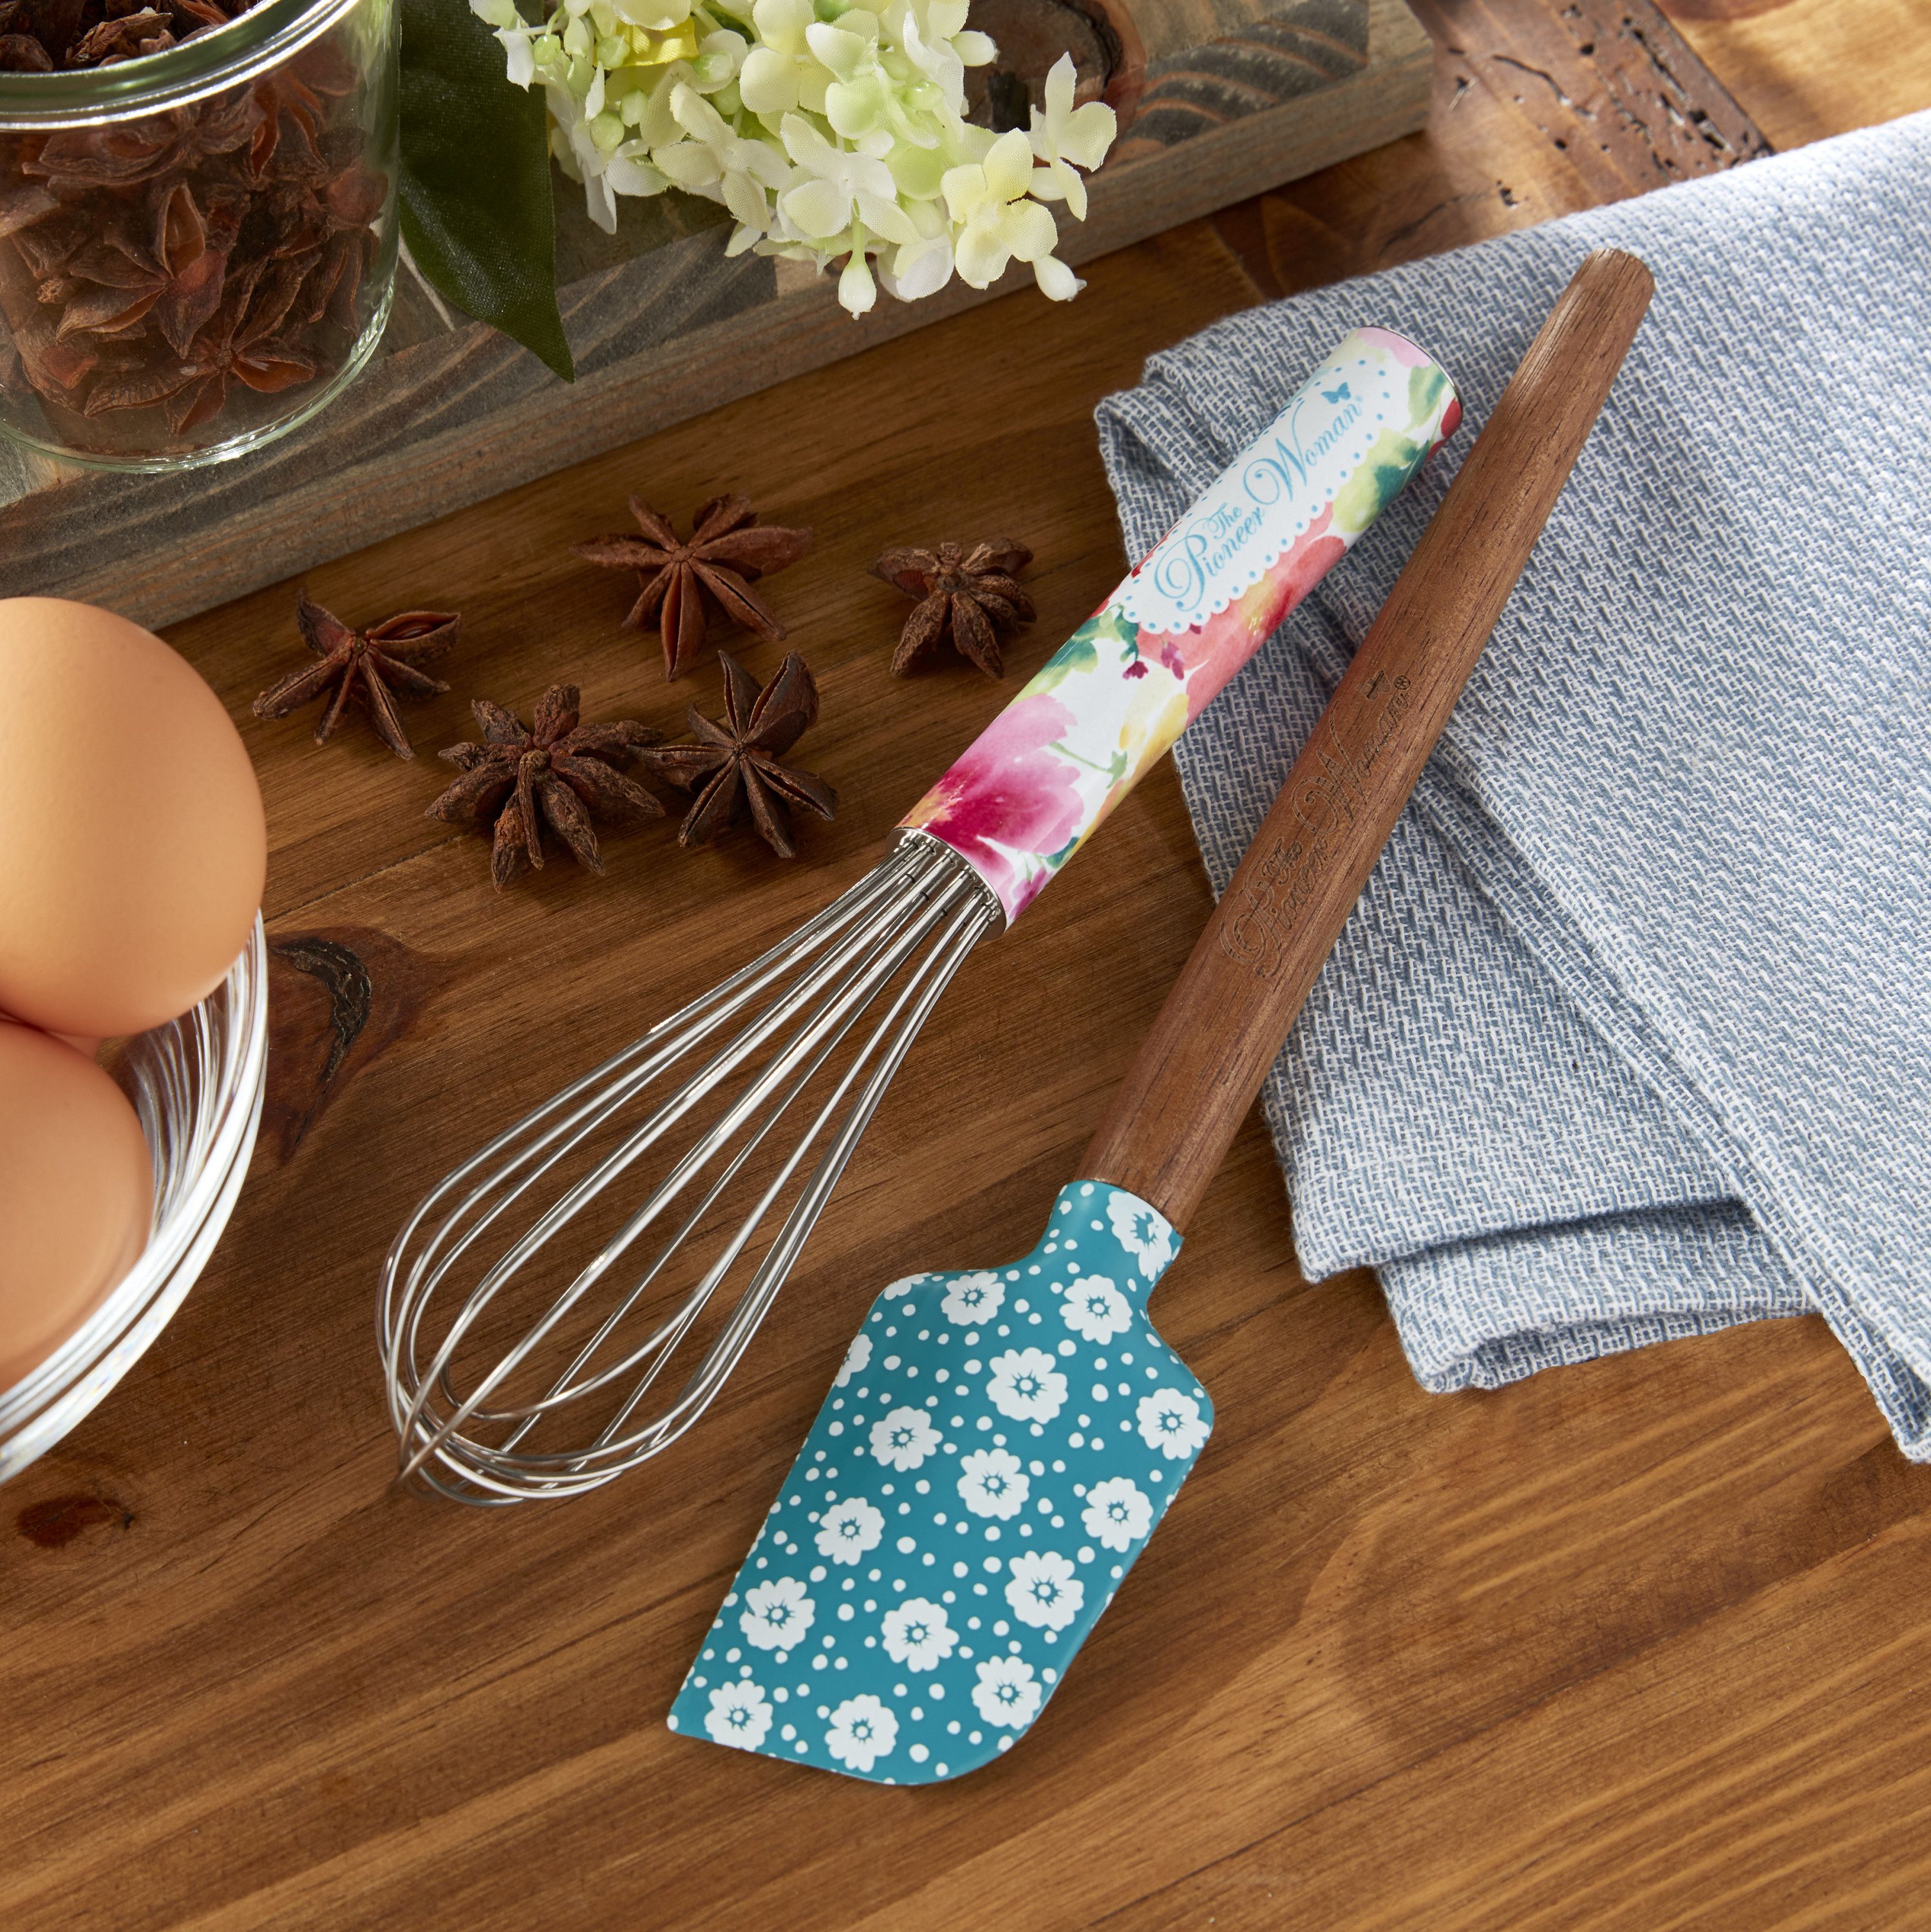 The Pioneer Woman Spatula and Whisk Set